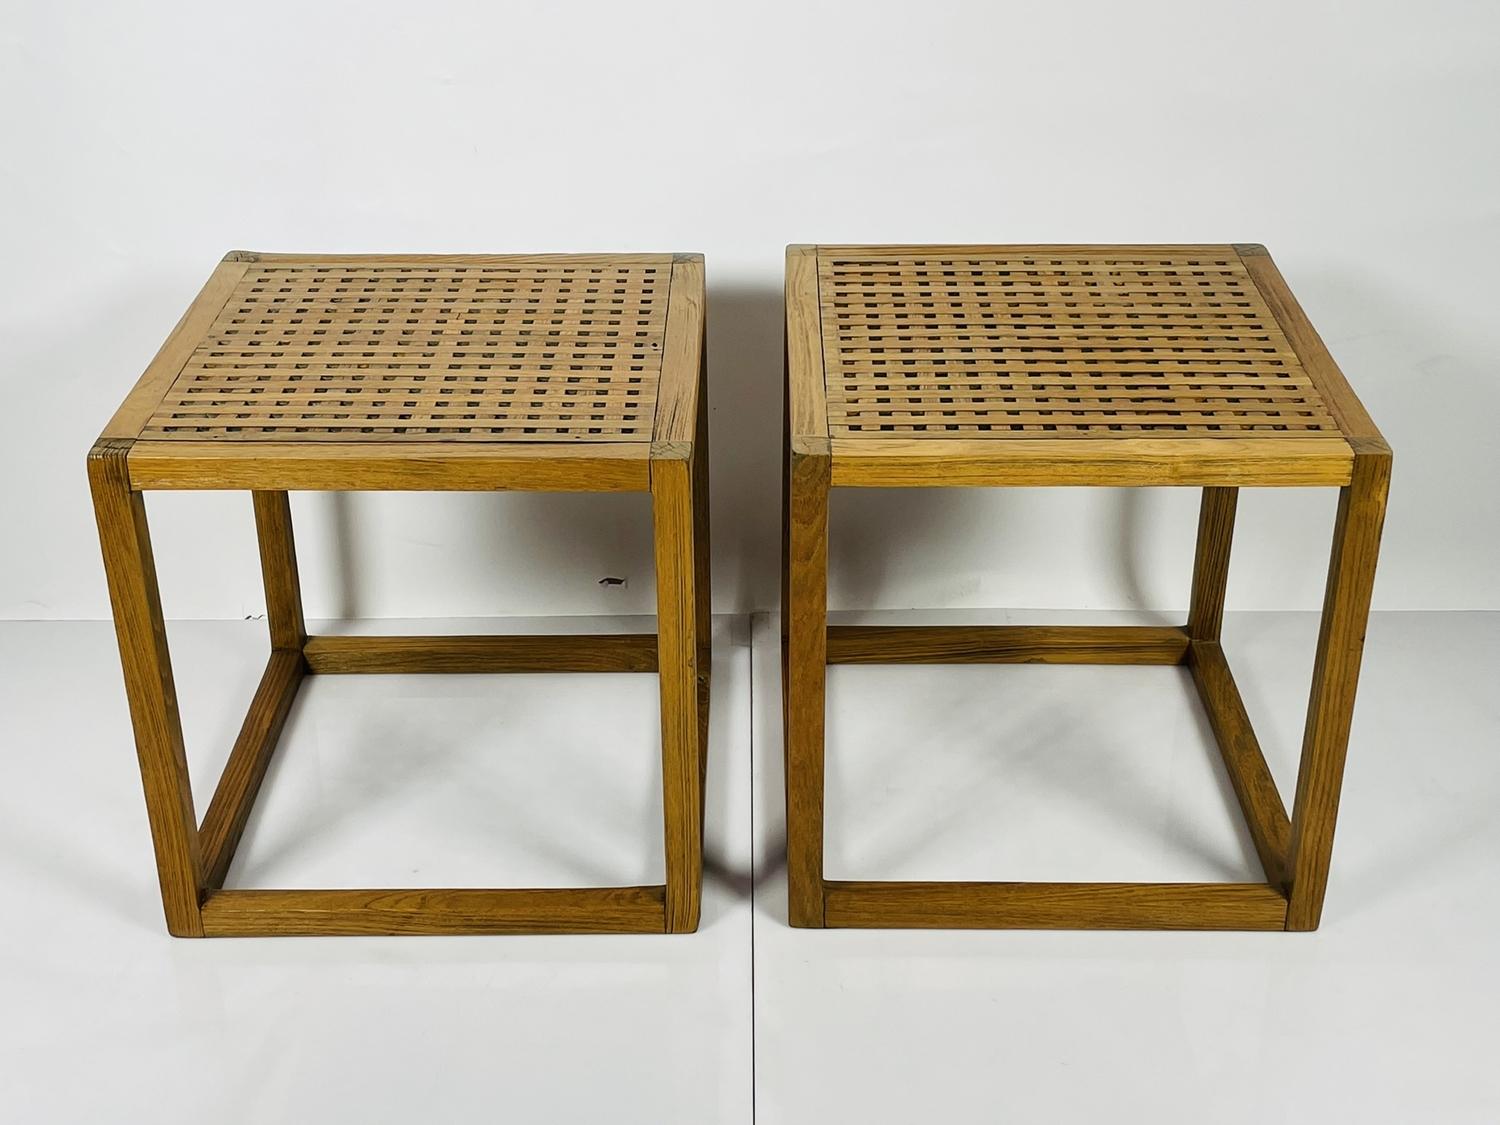 Pair of Teak Lattice Cube Tables by Summit Furniture In Good Condition For Sale In Los Angeles, CA